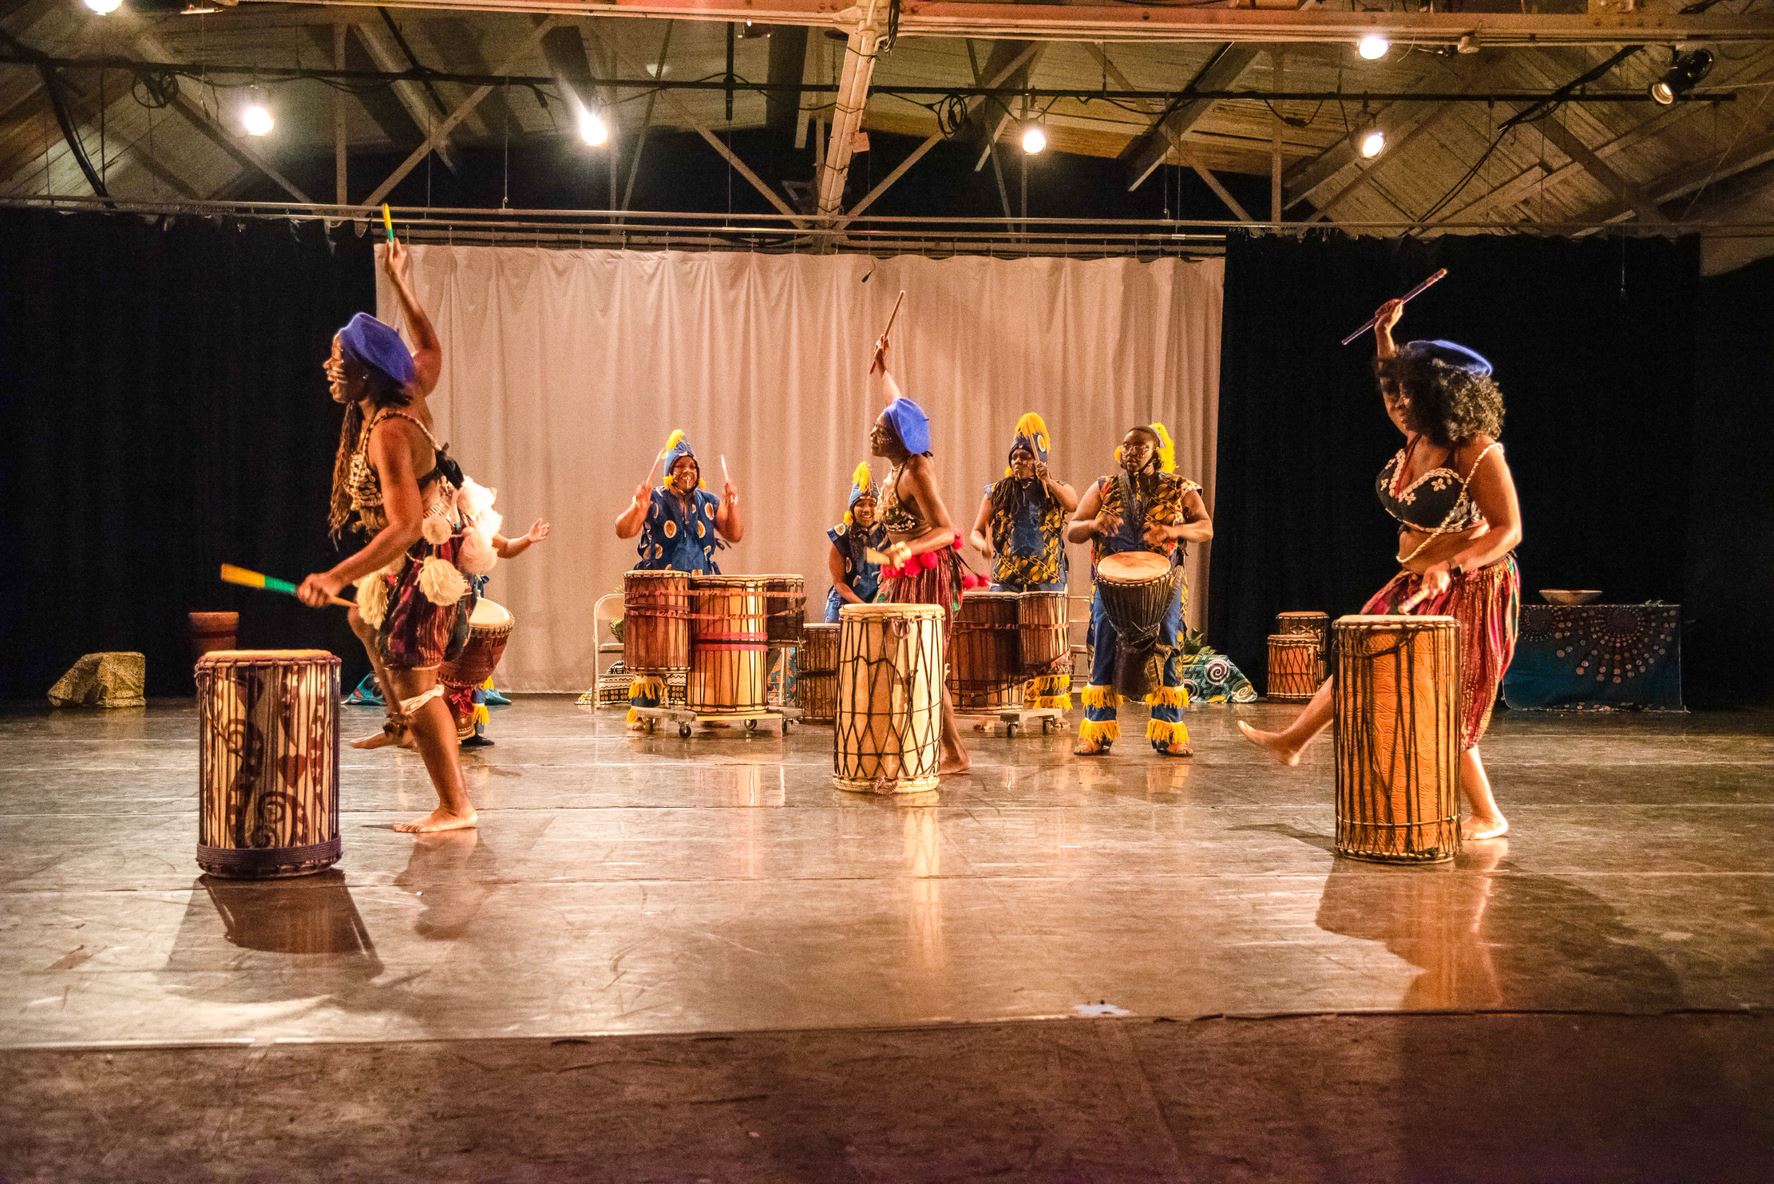 A group of women participating in a traditional West African drum and dance performance.